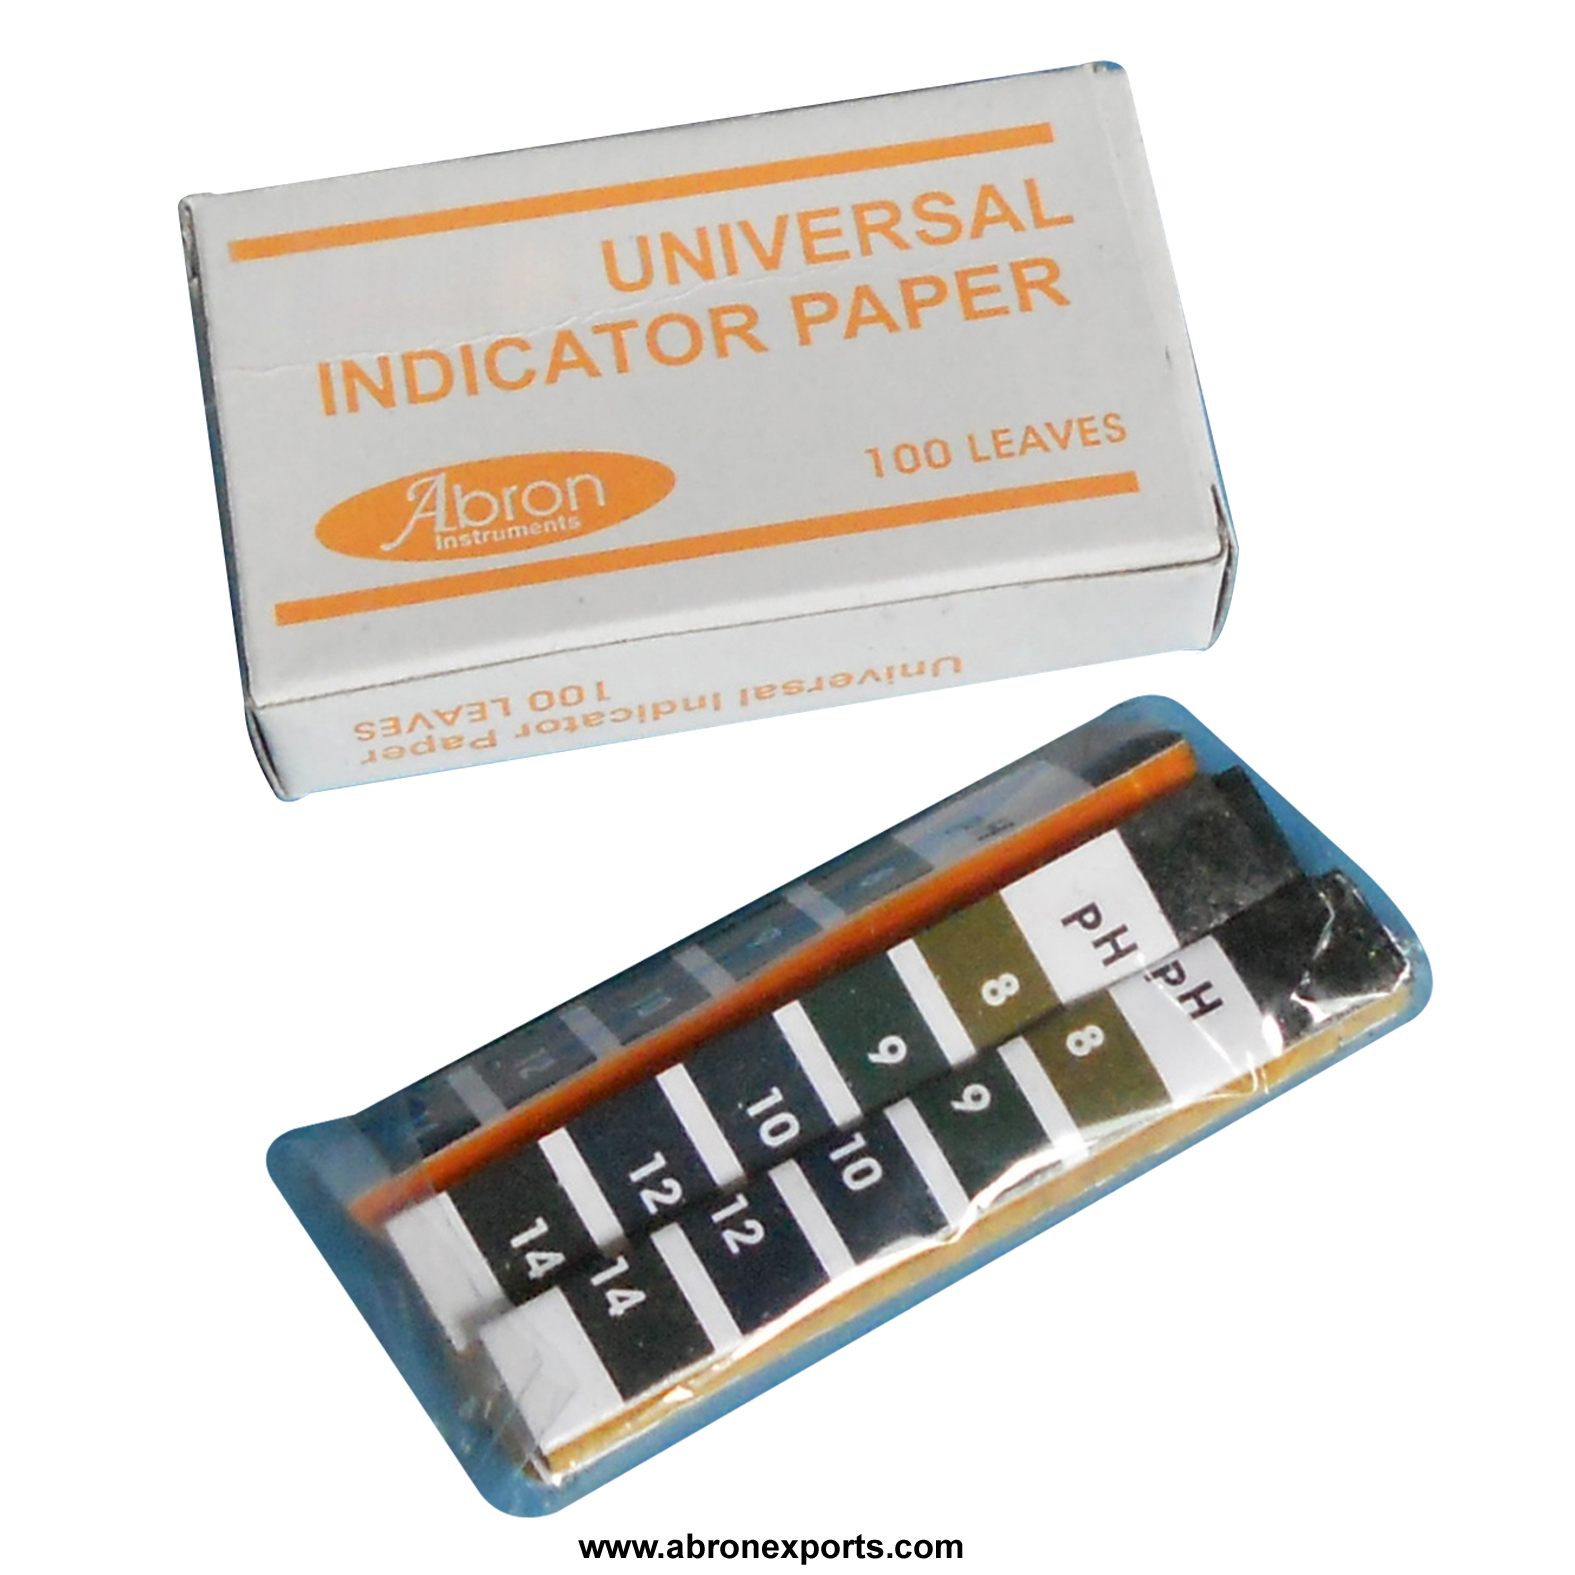 Indicator papers 5.0-7.5 L R 1bx 100 lvs abron IP-1105